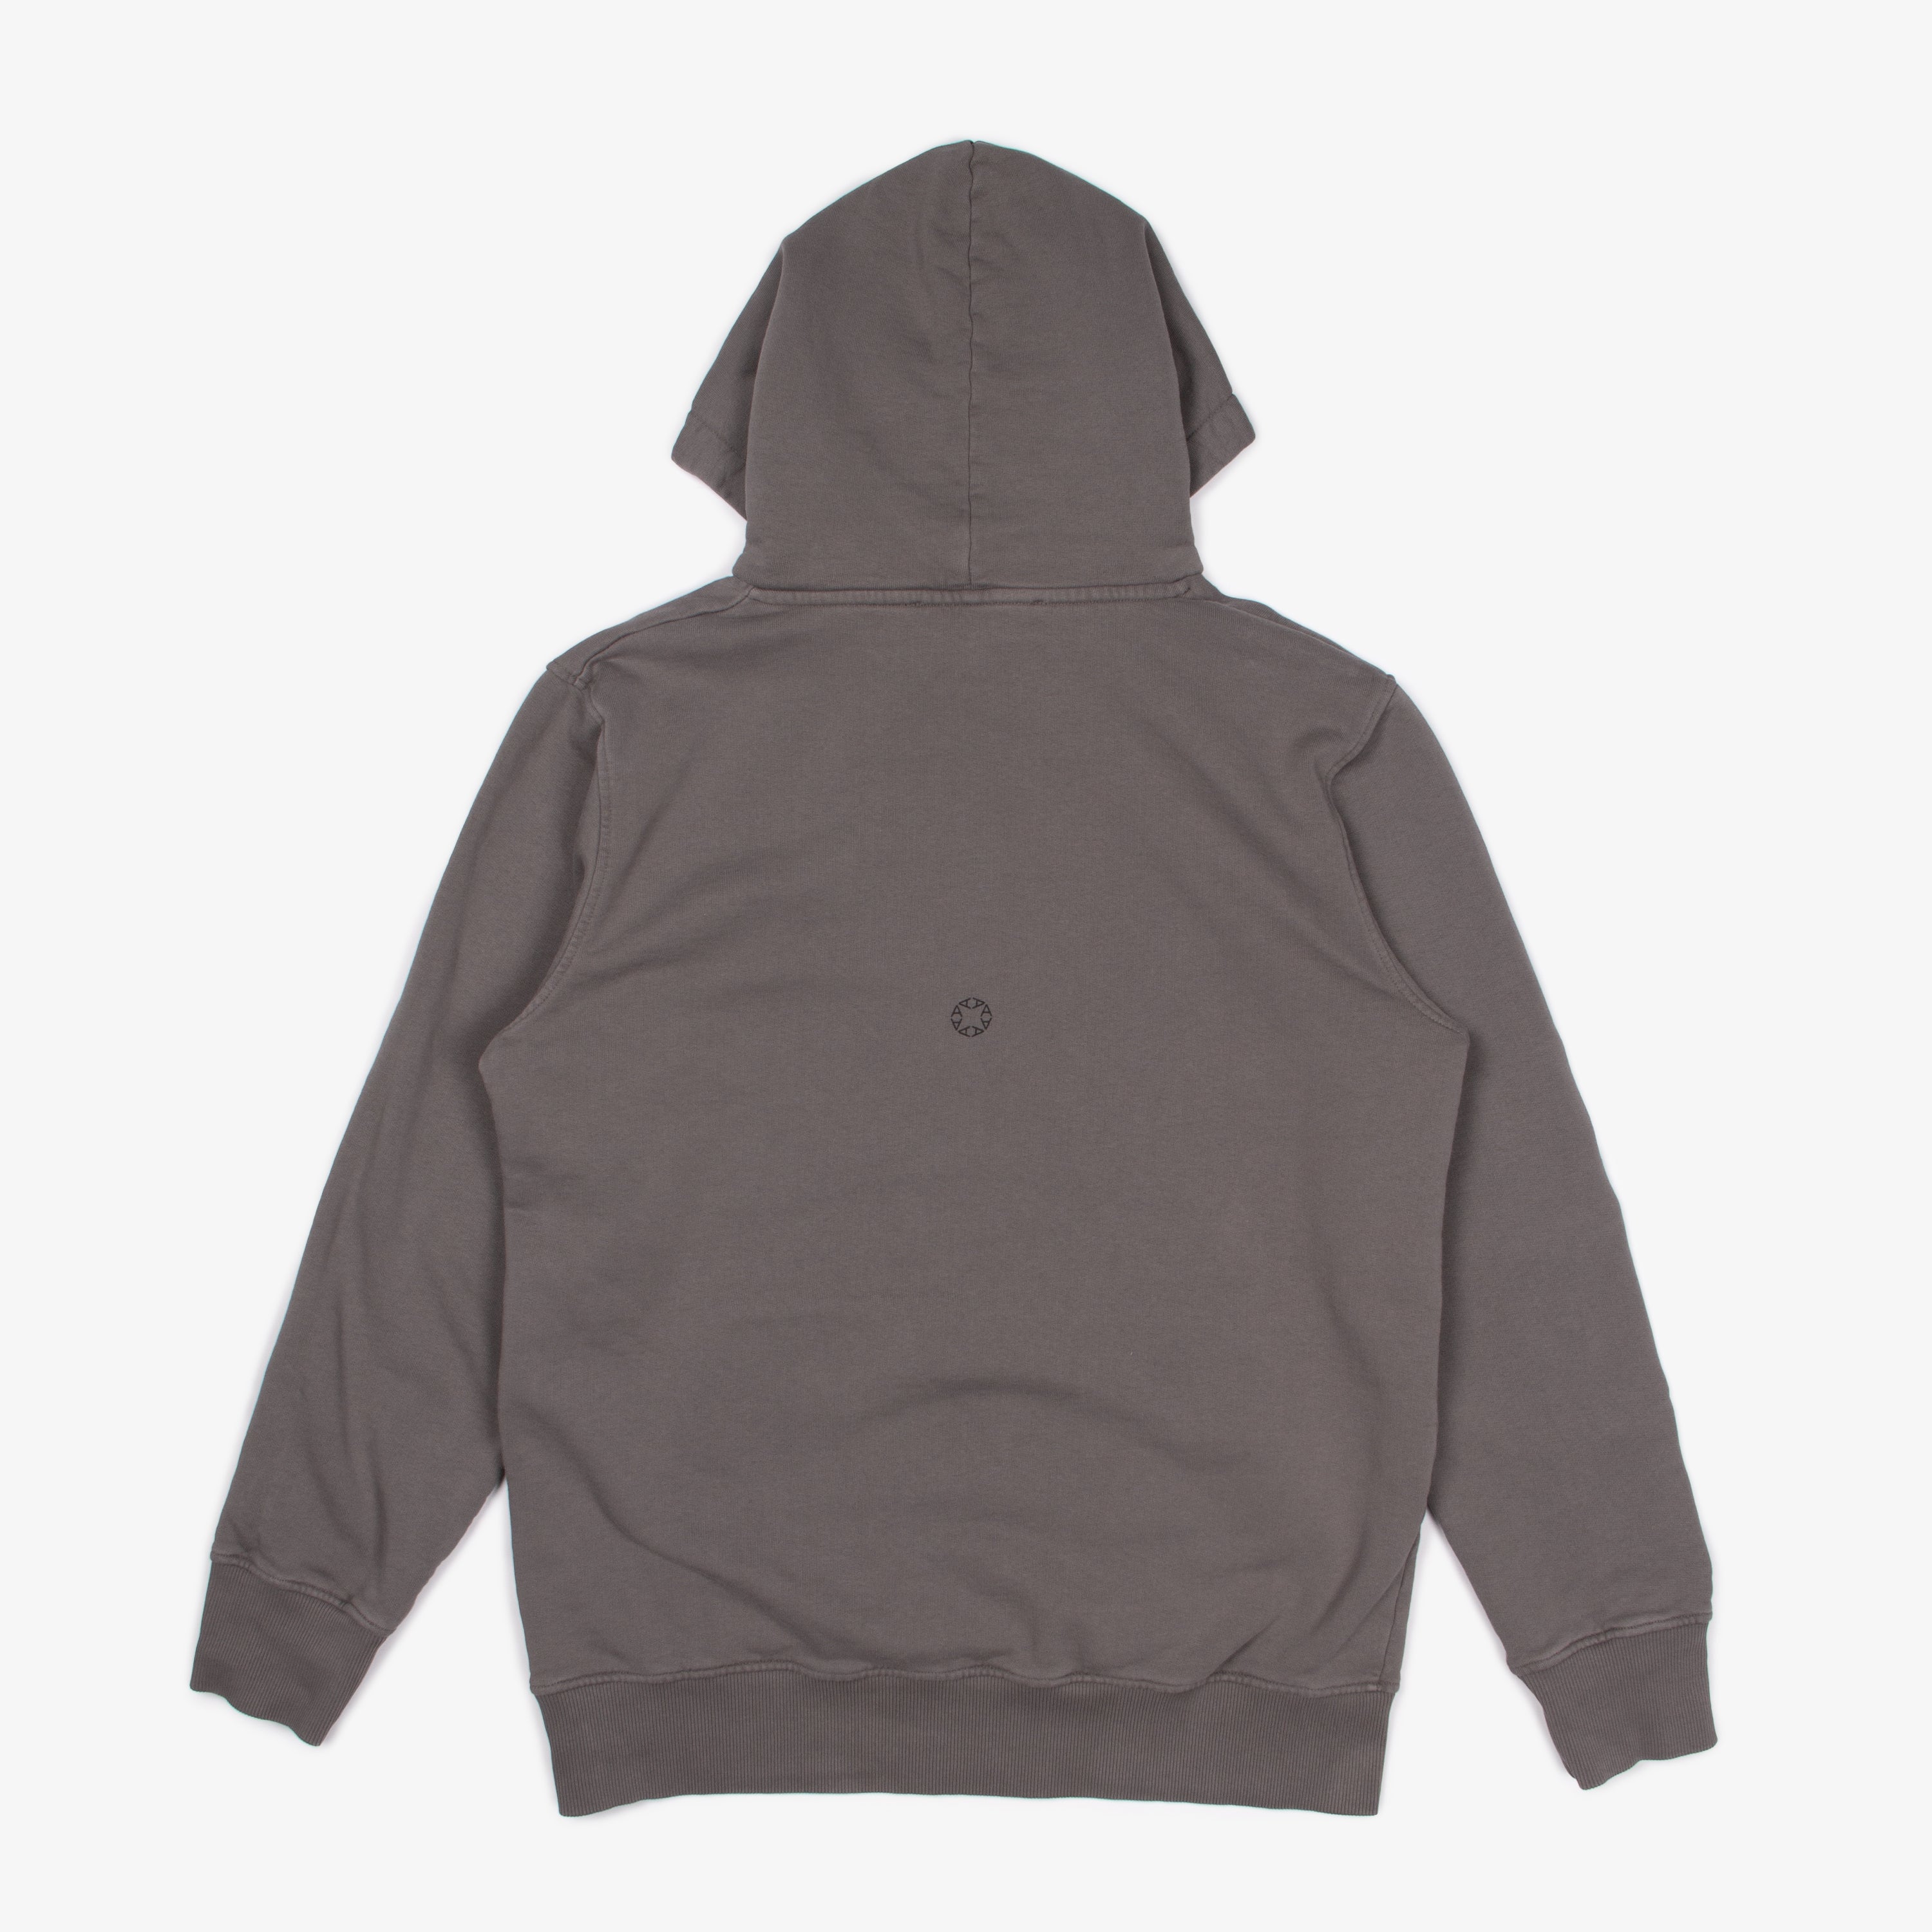 x AP FRIENDS AND FAMILY HOODIE